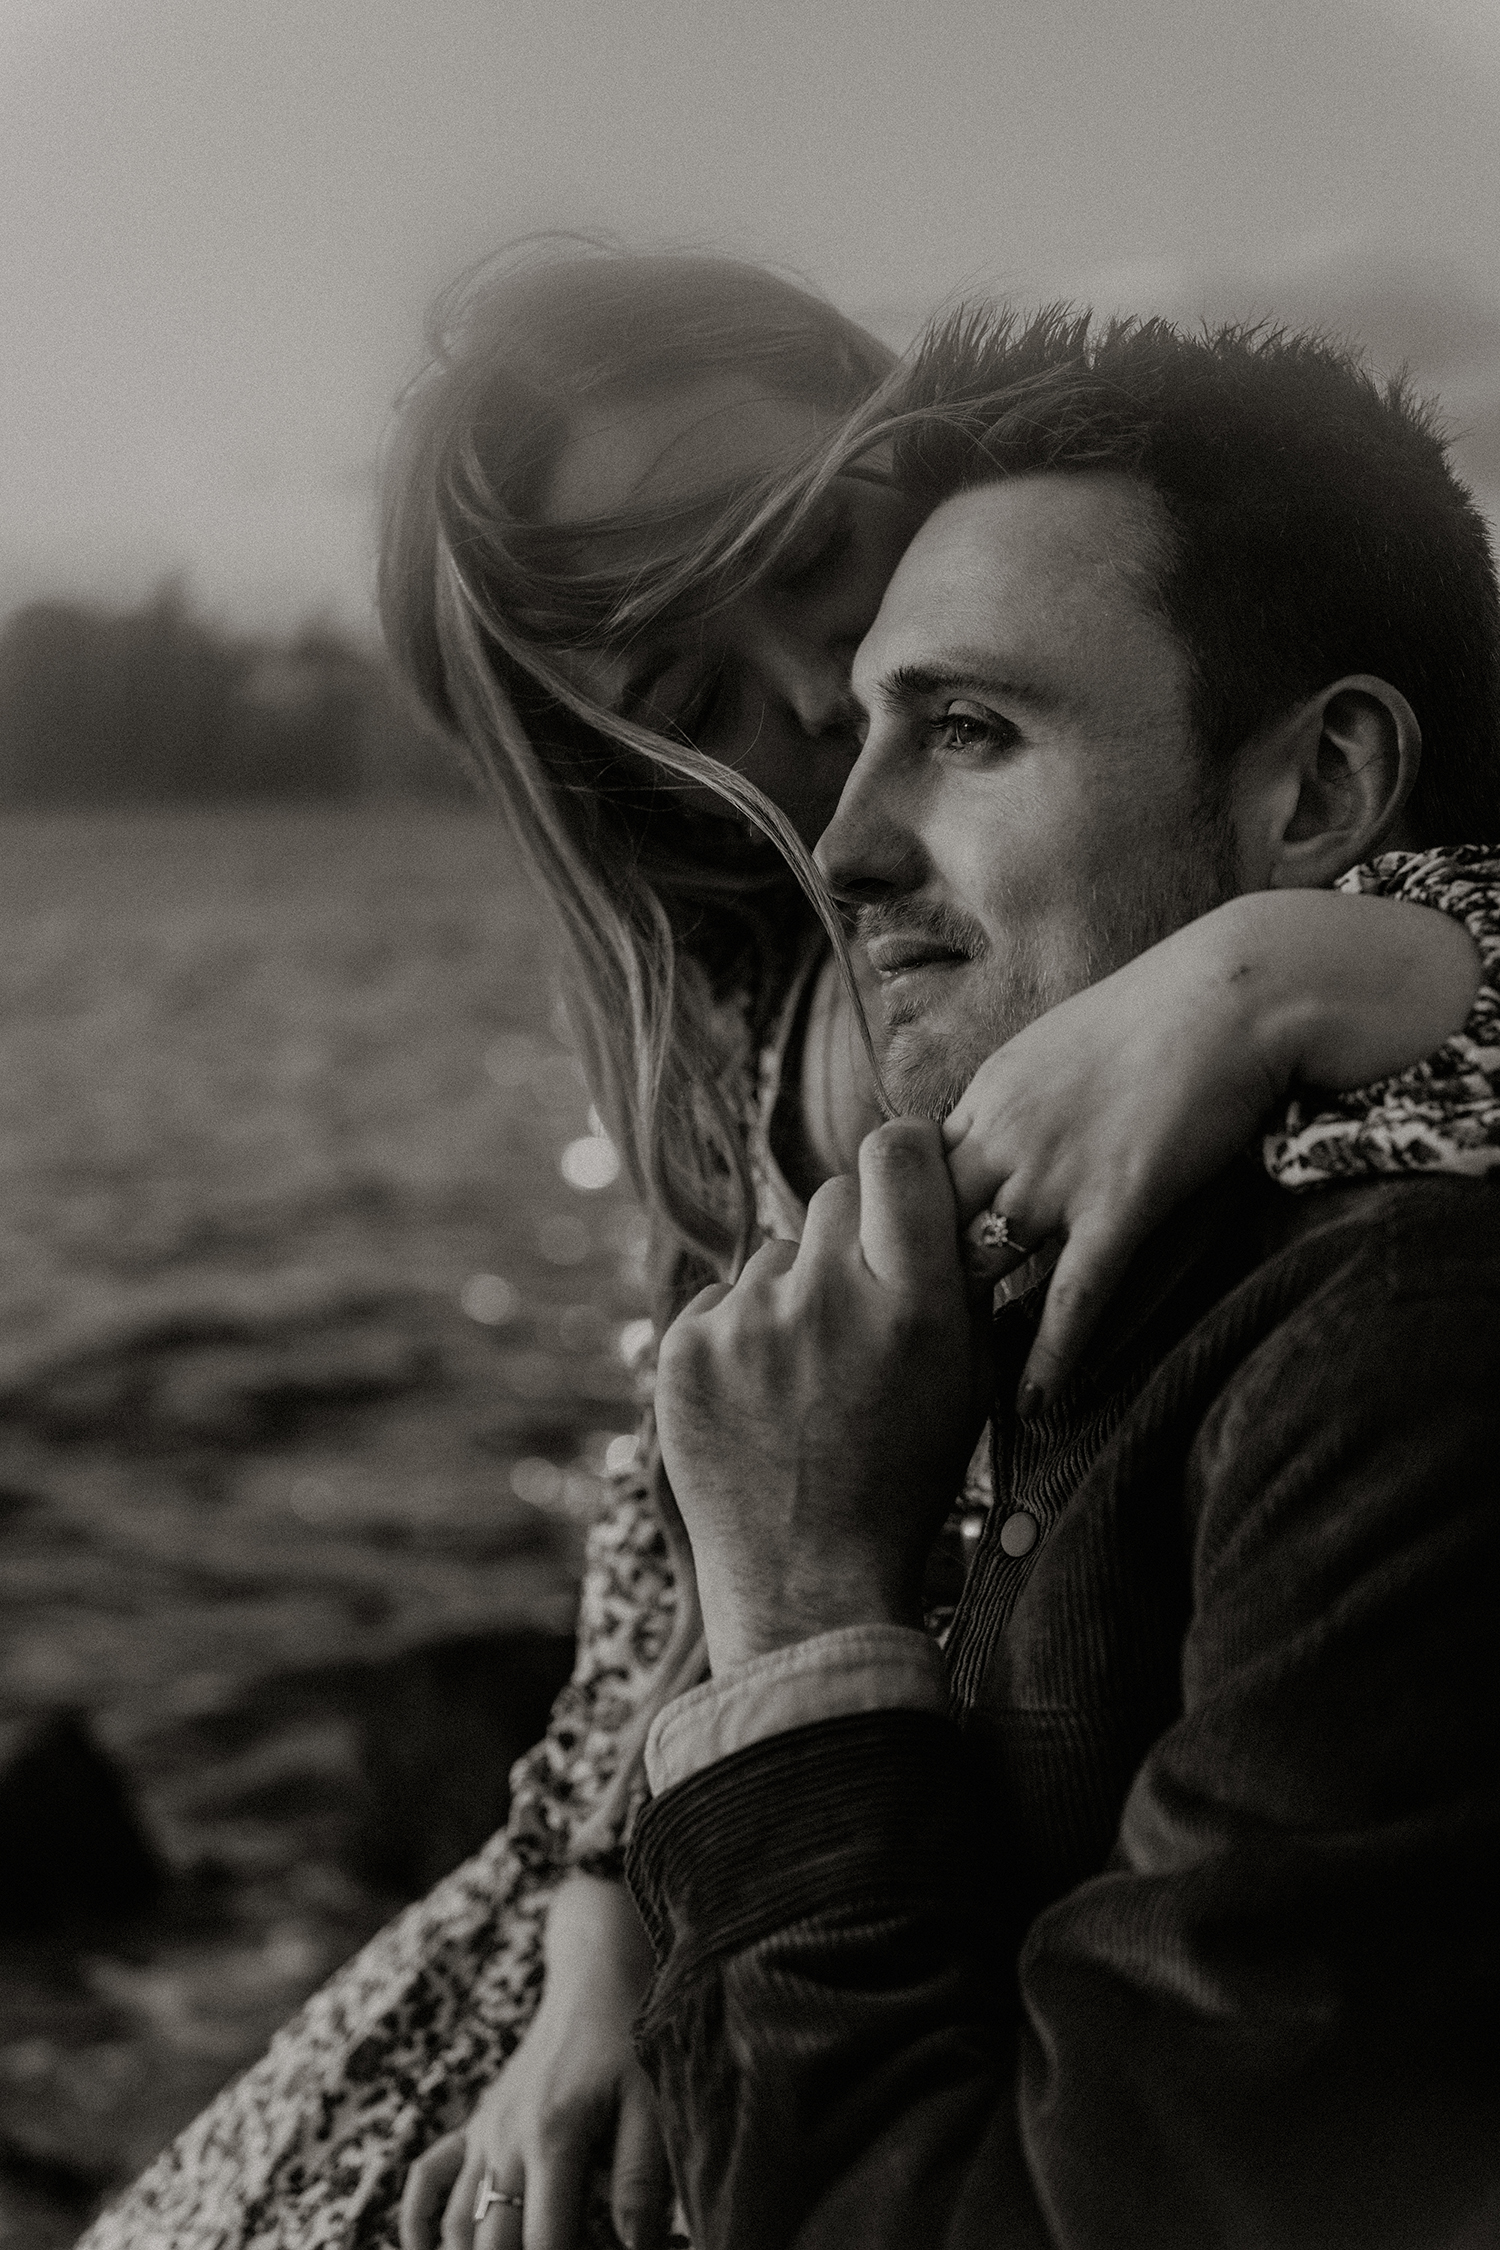 Black and white engagement photos on a rocky beach in Williamsburg.